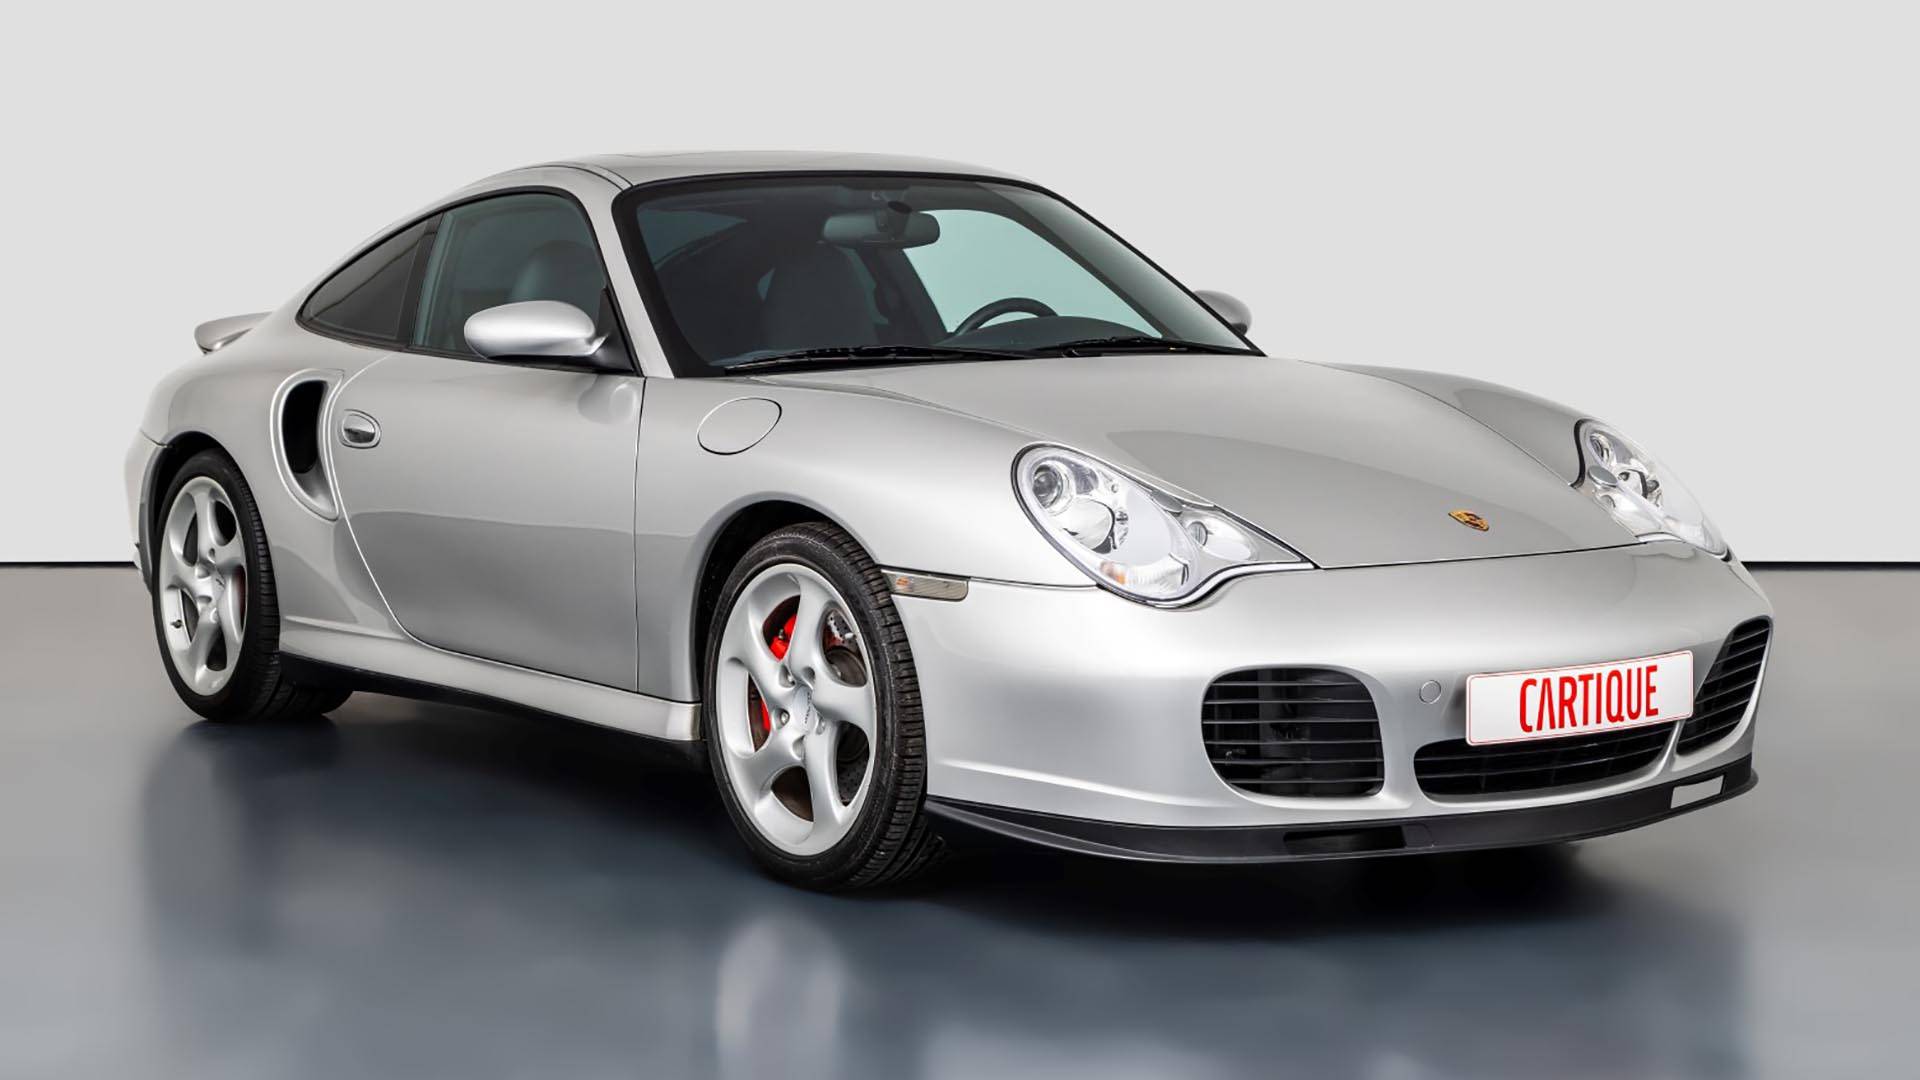 For Sale: Porsche 911 Turbo (WLS) (2002) offered for GBP 131,440